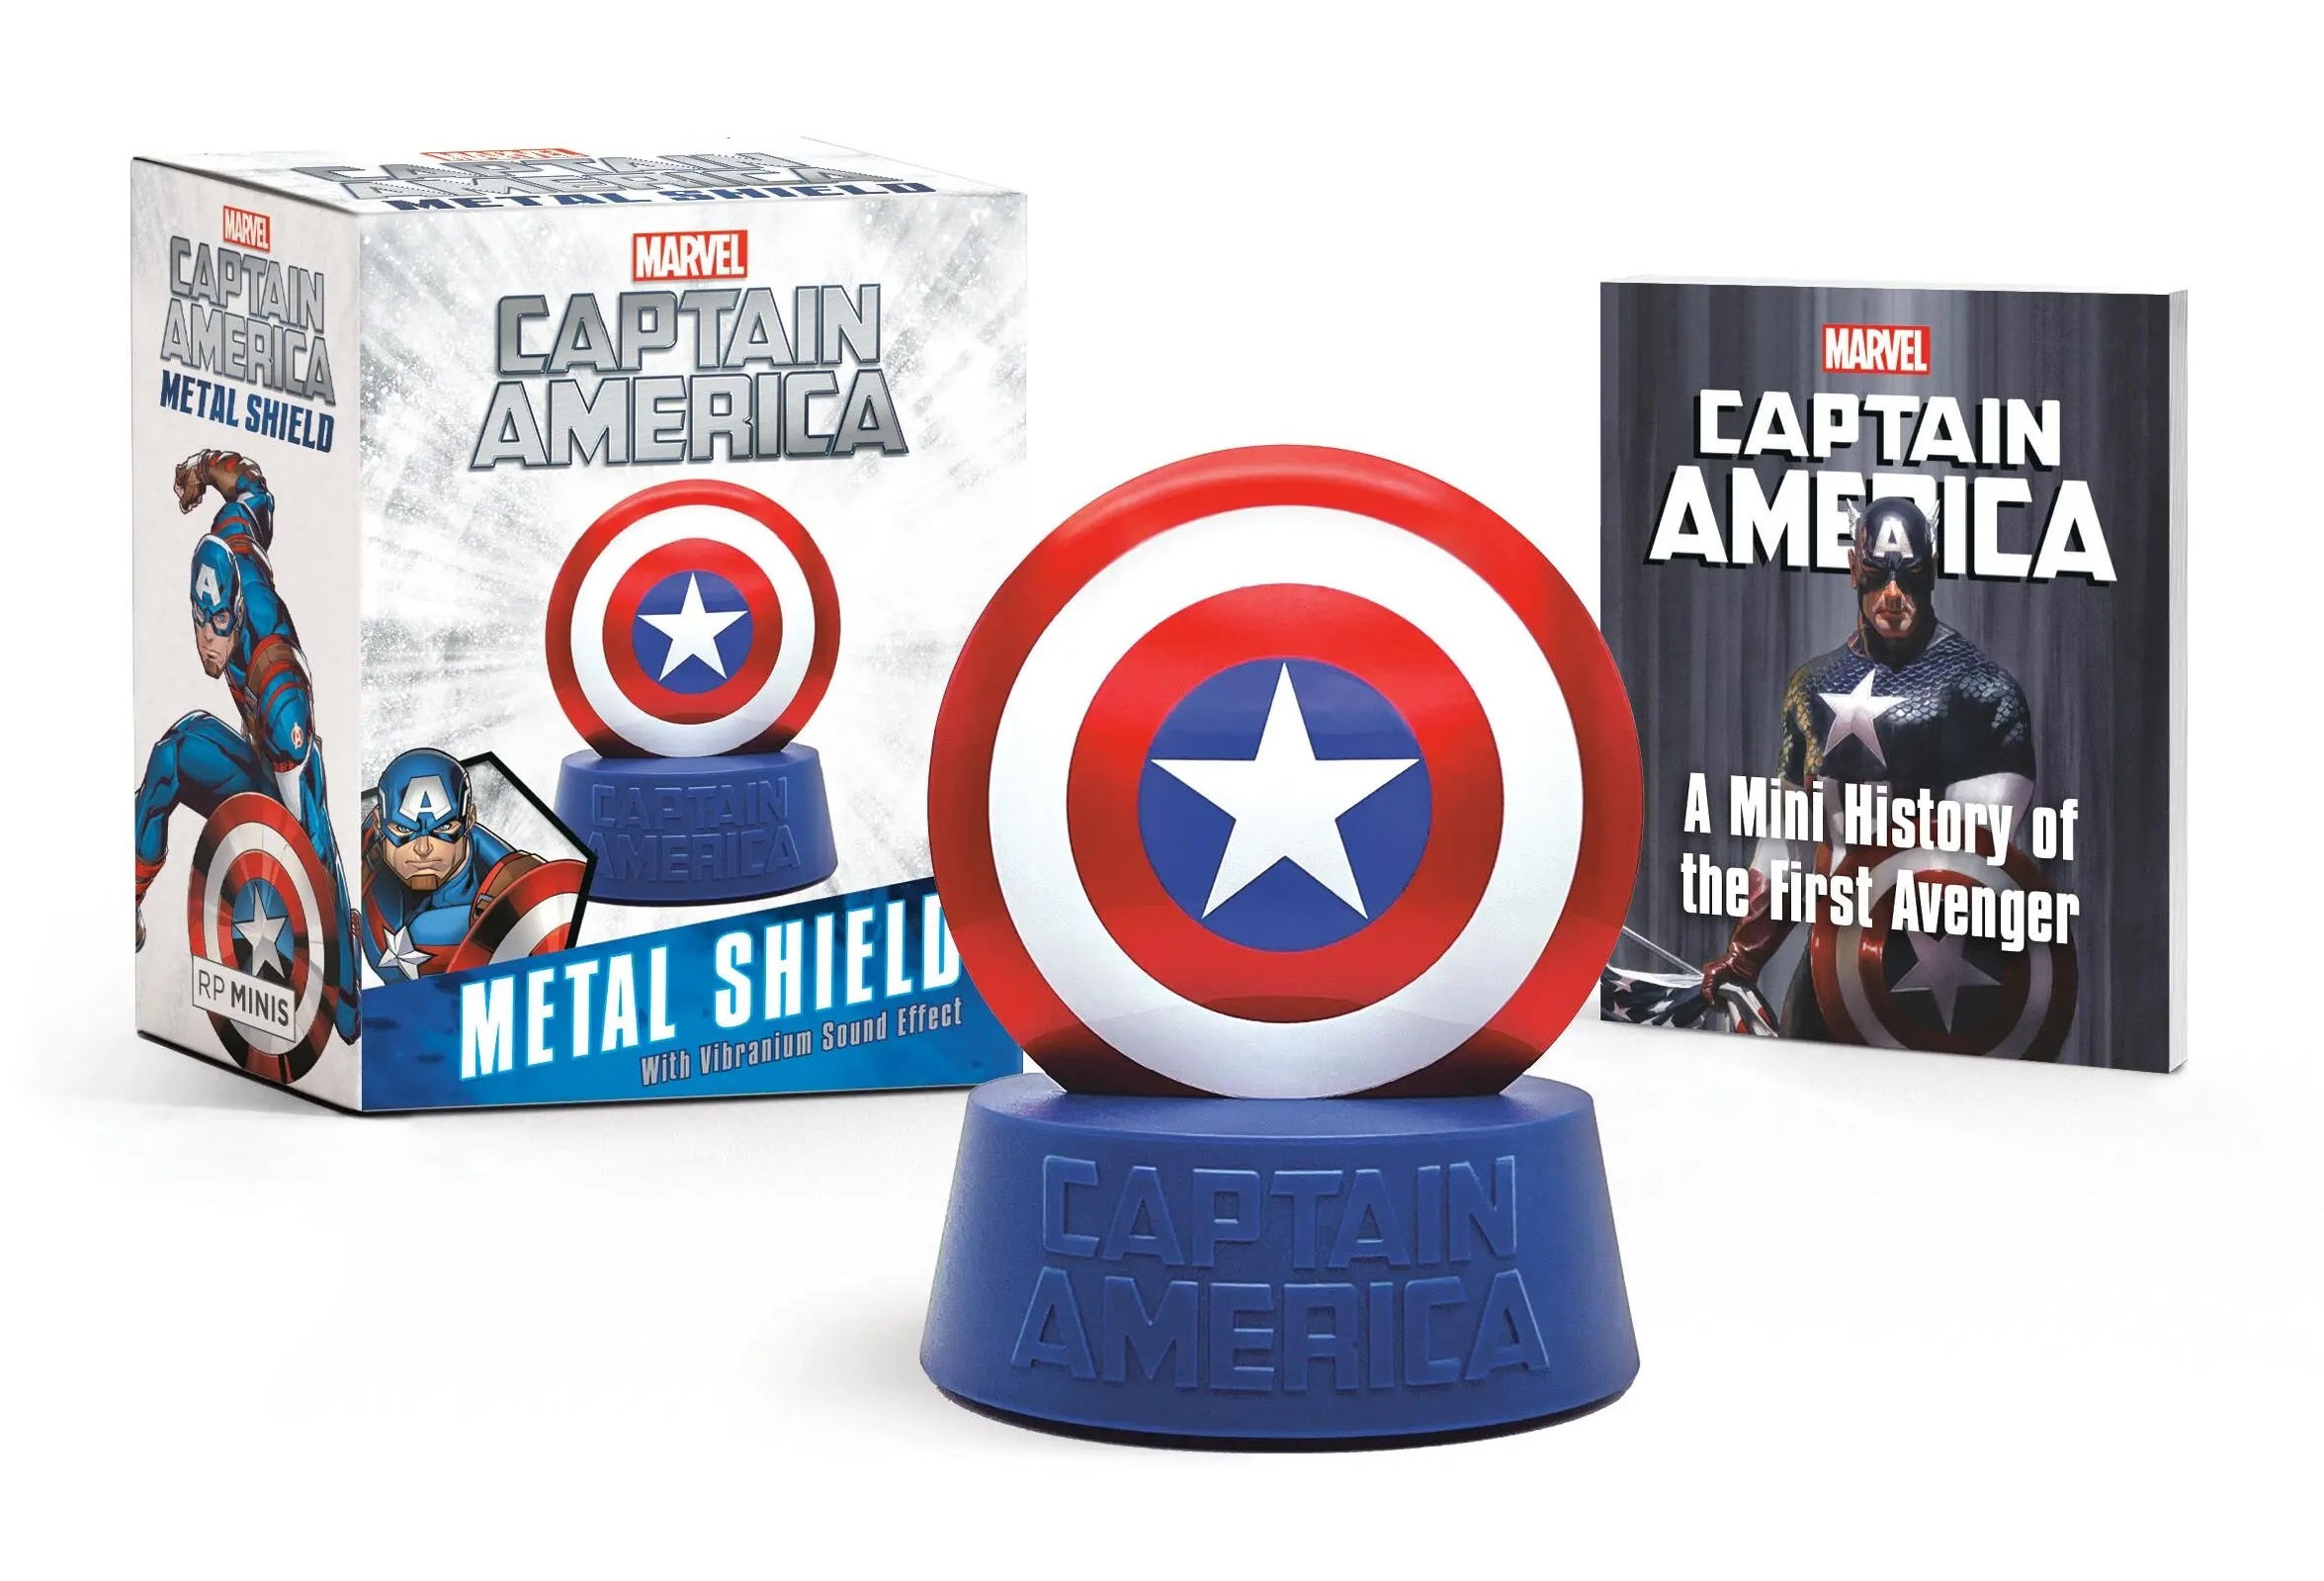 Captain America Metal Shield with Sound Effect Plus Mini History